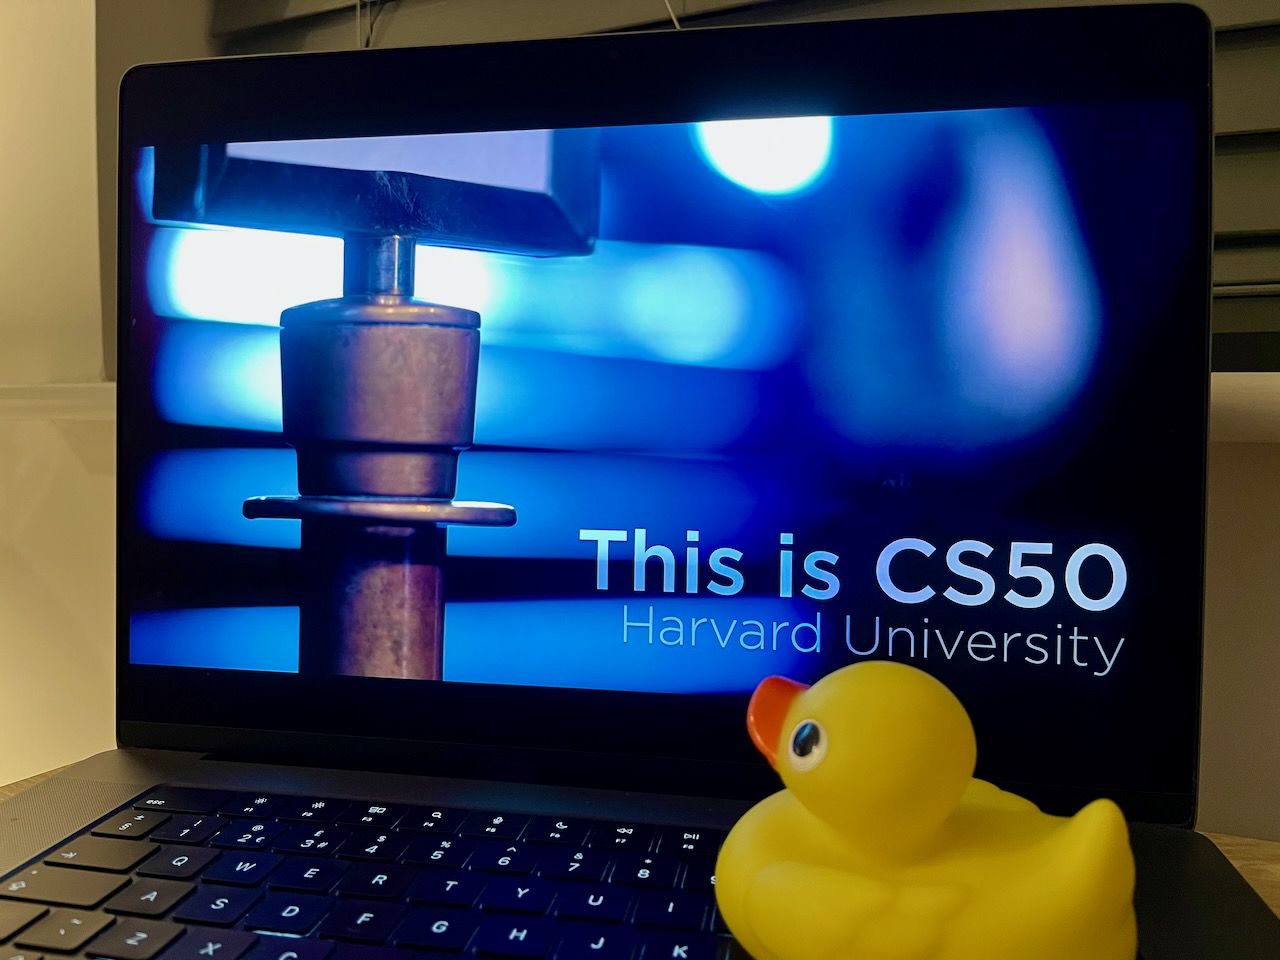 Review of CS50 – Harvard's Introduction to Computer Science Course